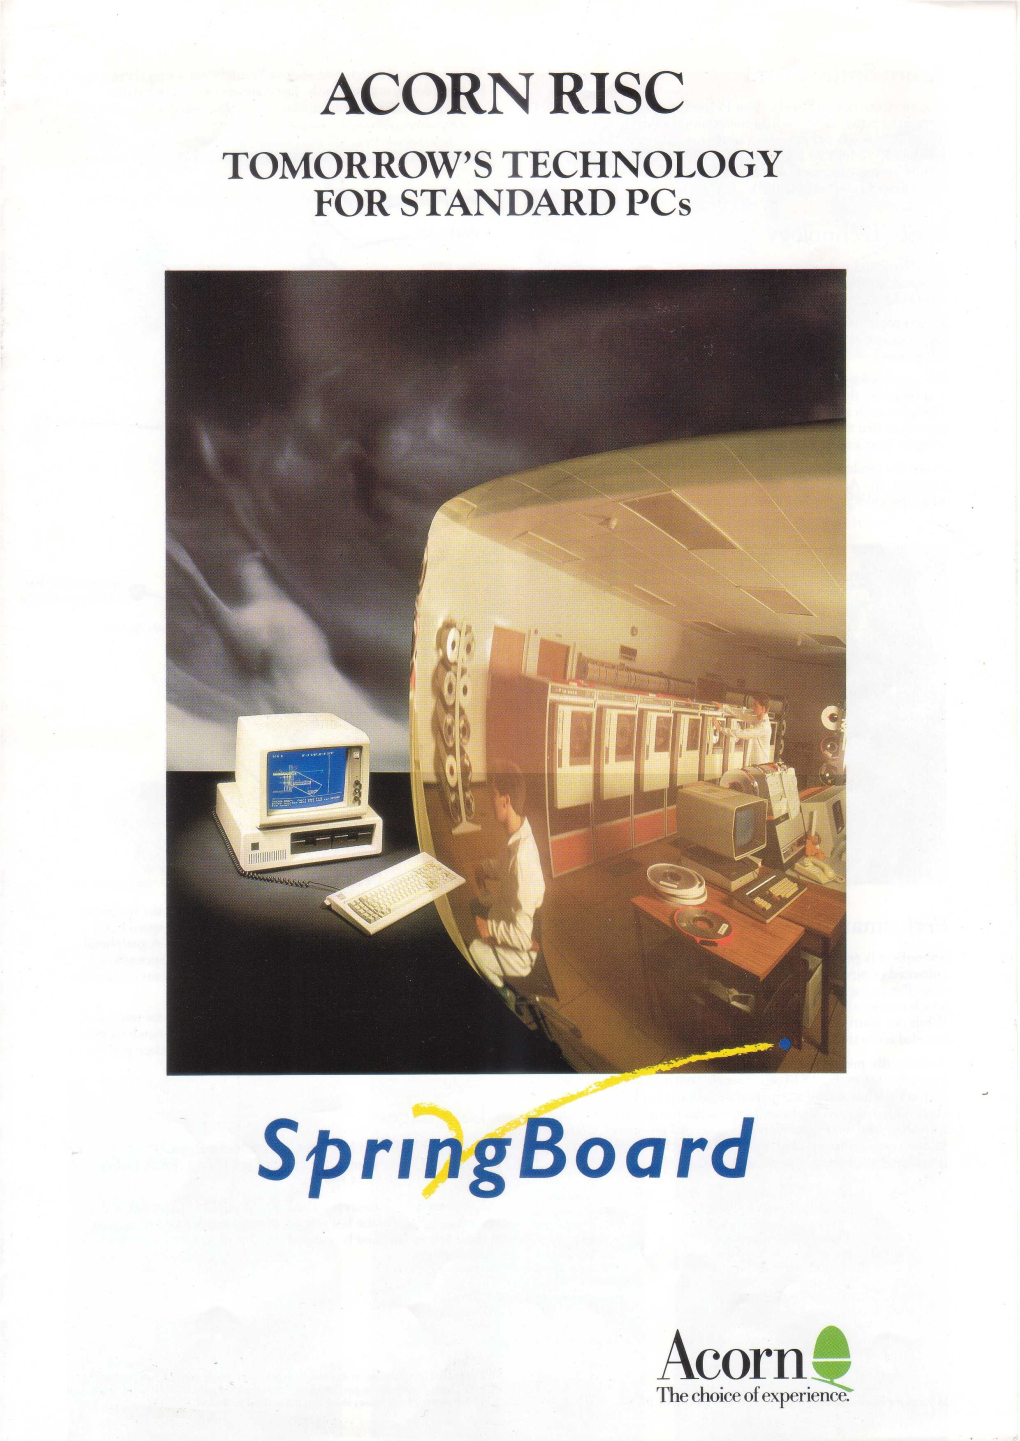 ACORN RISC TOMORROW's TECHNOLOGY for STANDARD Pcs Acorn Springboard These Advanced Design Features Give Springboard a Staggering Performance by Any Standards